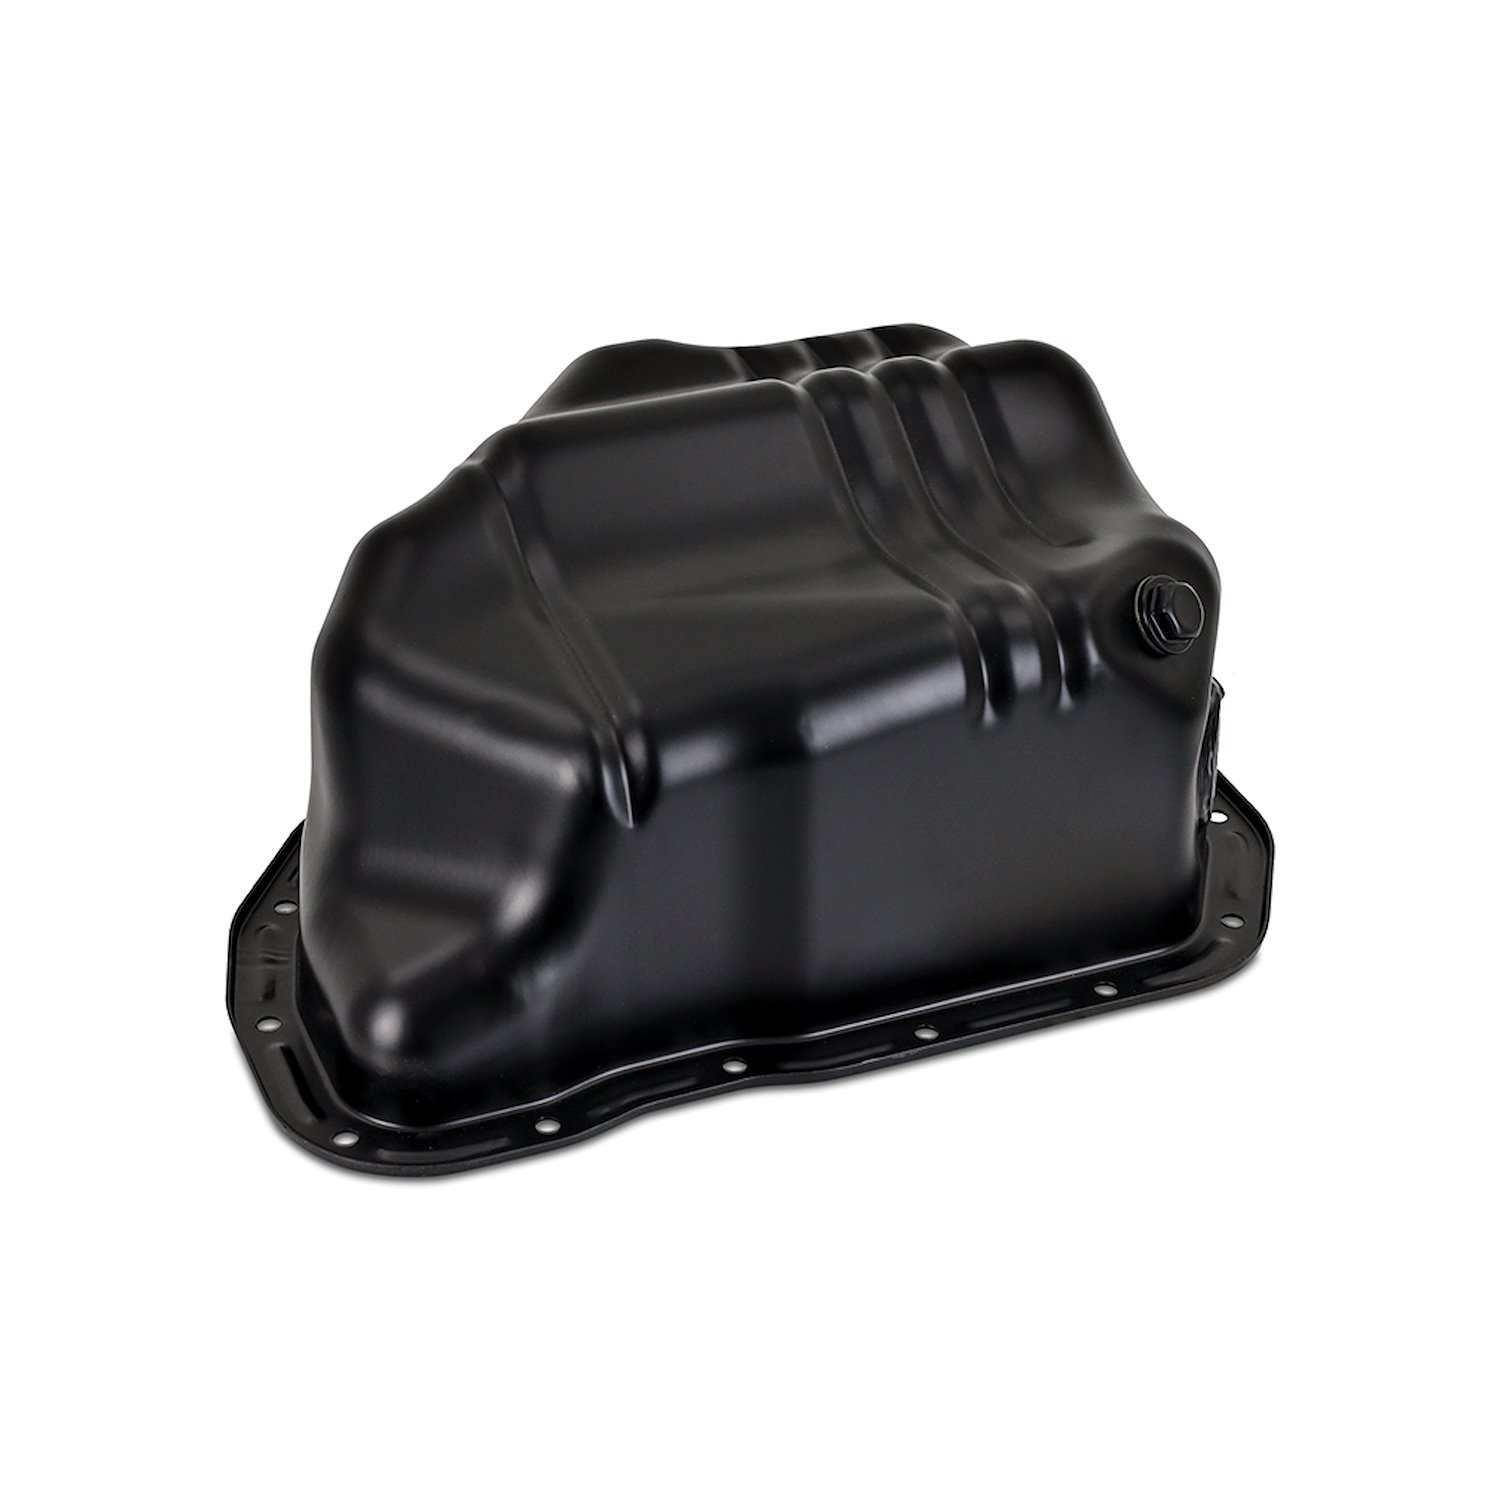 MMOPN-DMAX-01S Replacement Oil Pan, fits Chevy/GMC 6.6L Duramax 2001-2010